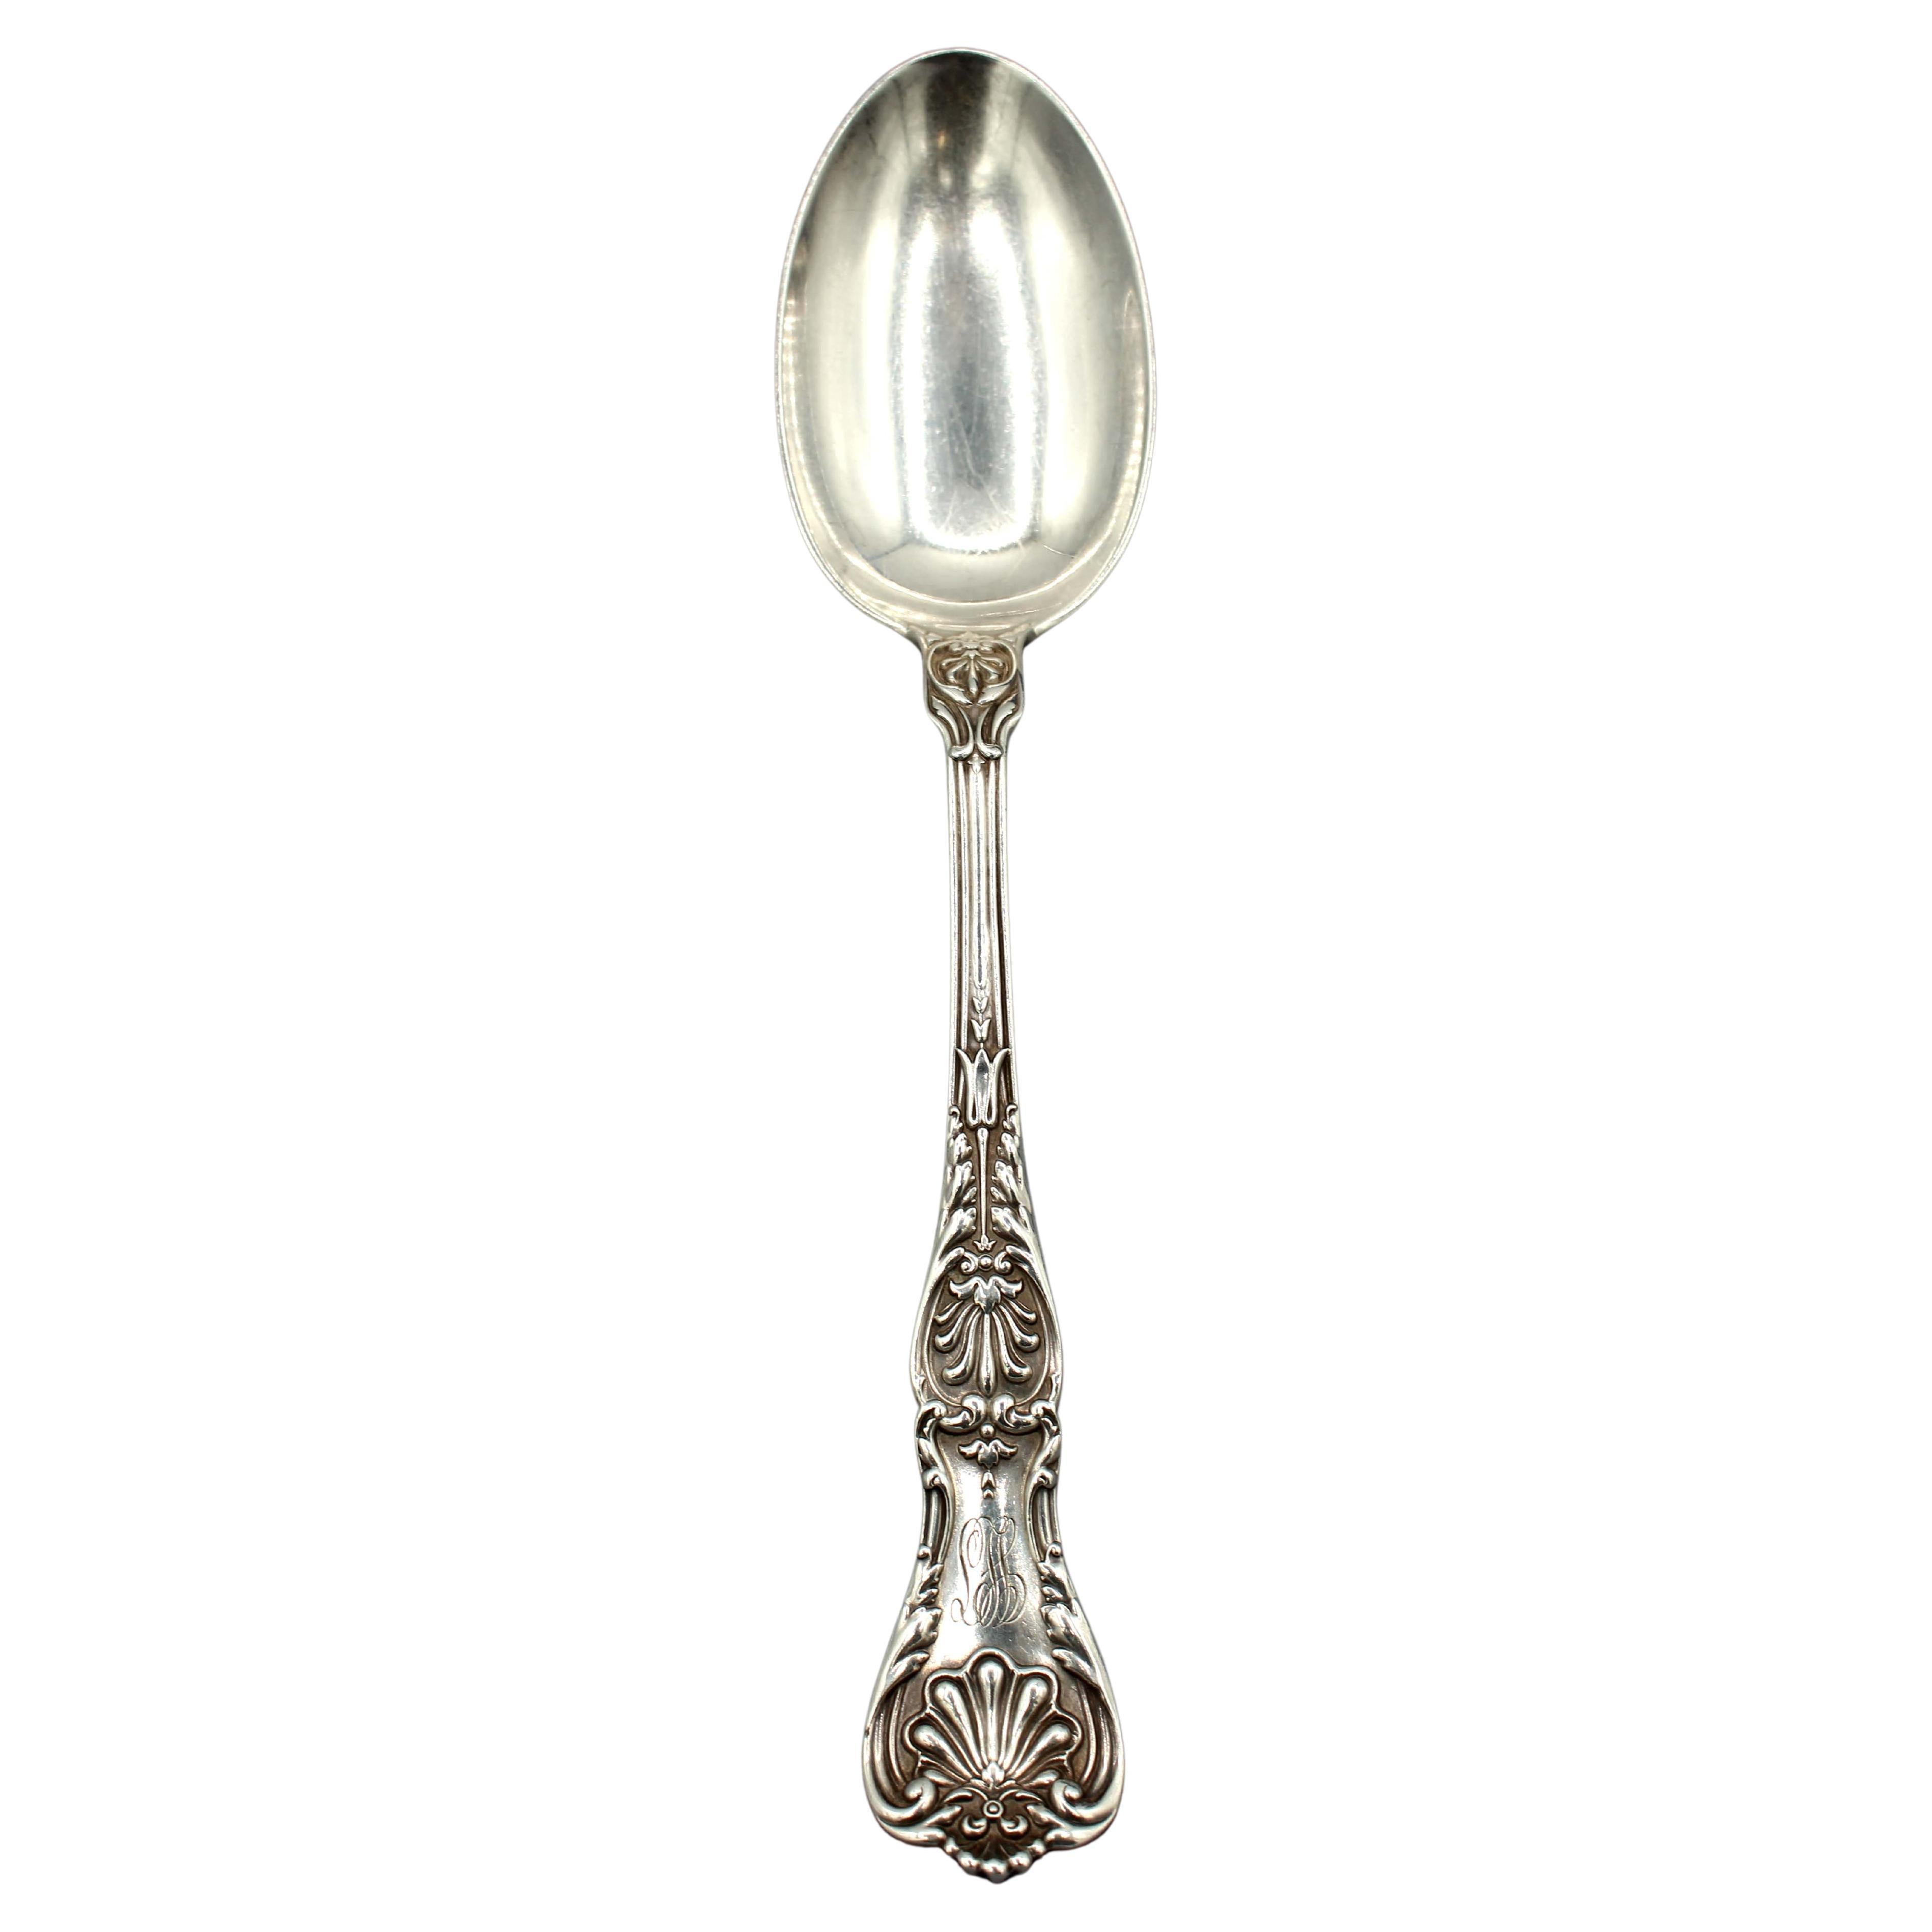 1904 Sterling Silver "King George" Pattern Spoon by Gorham For Sale